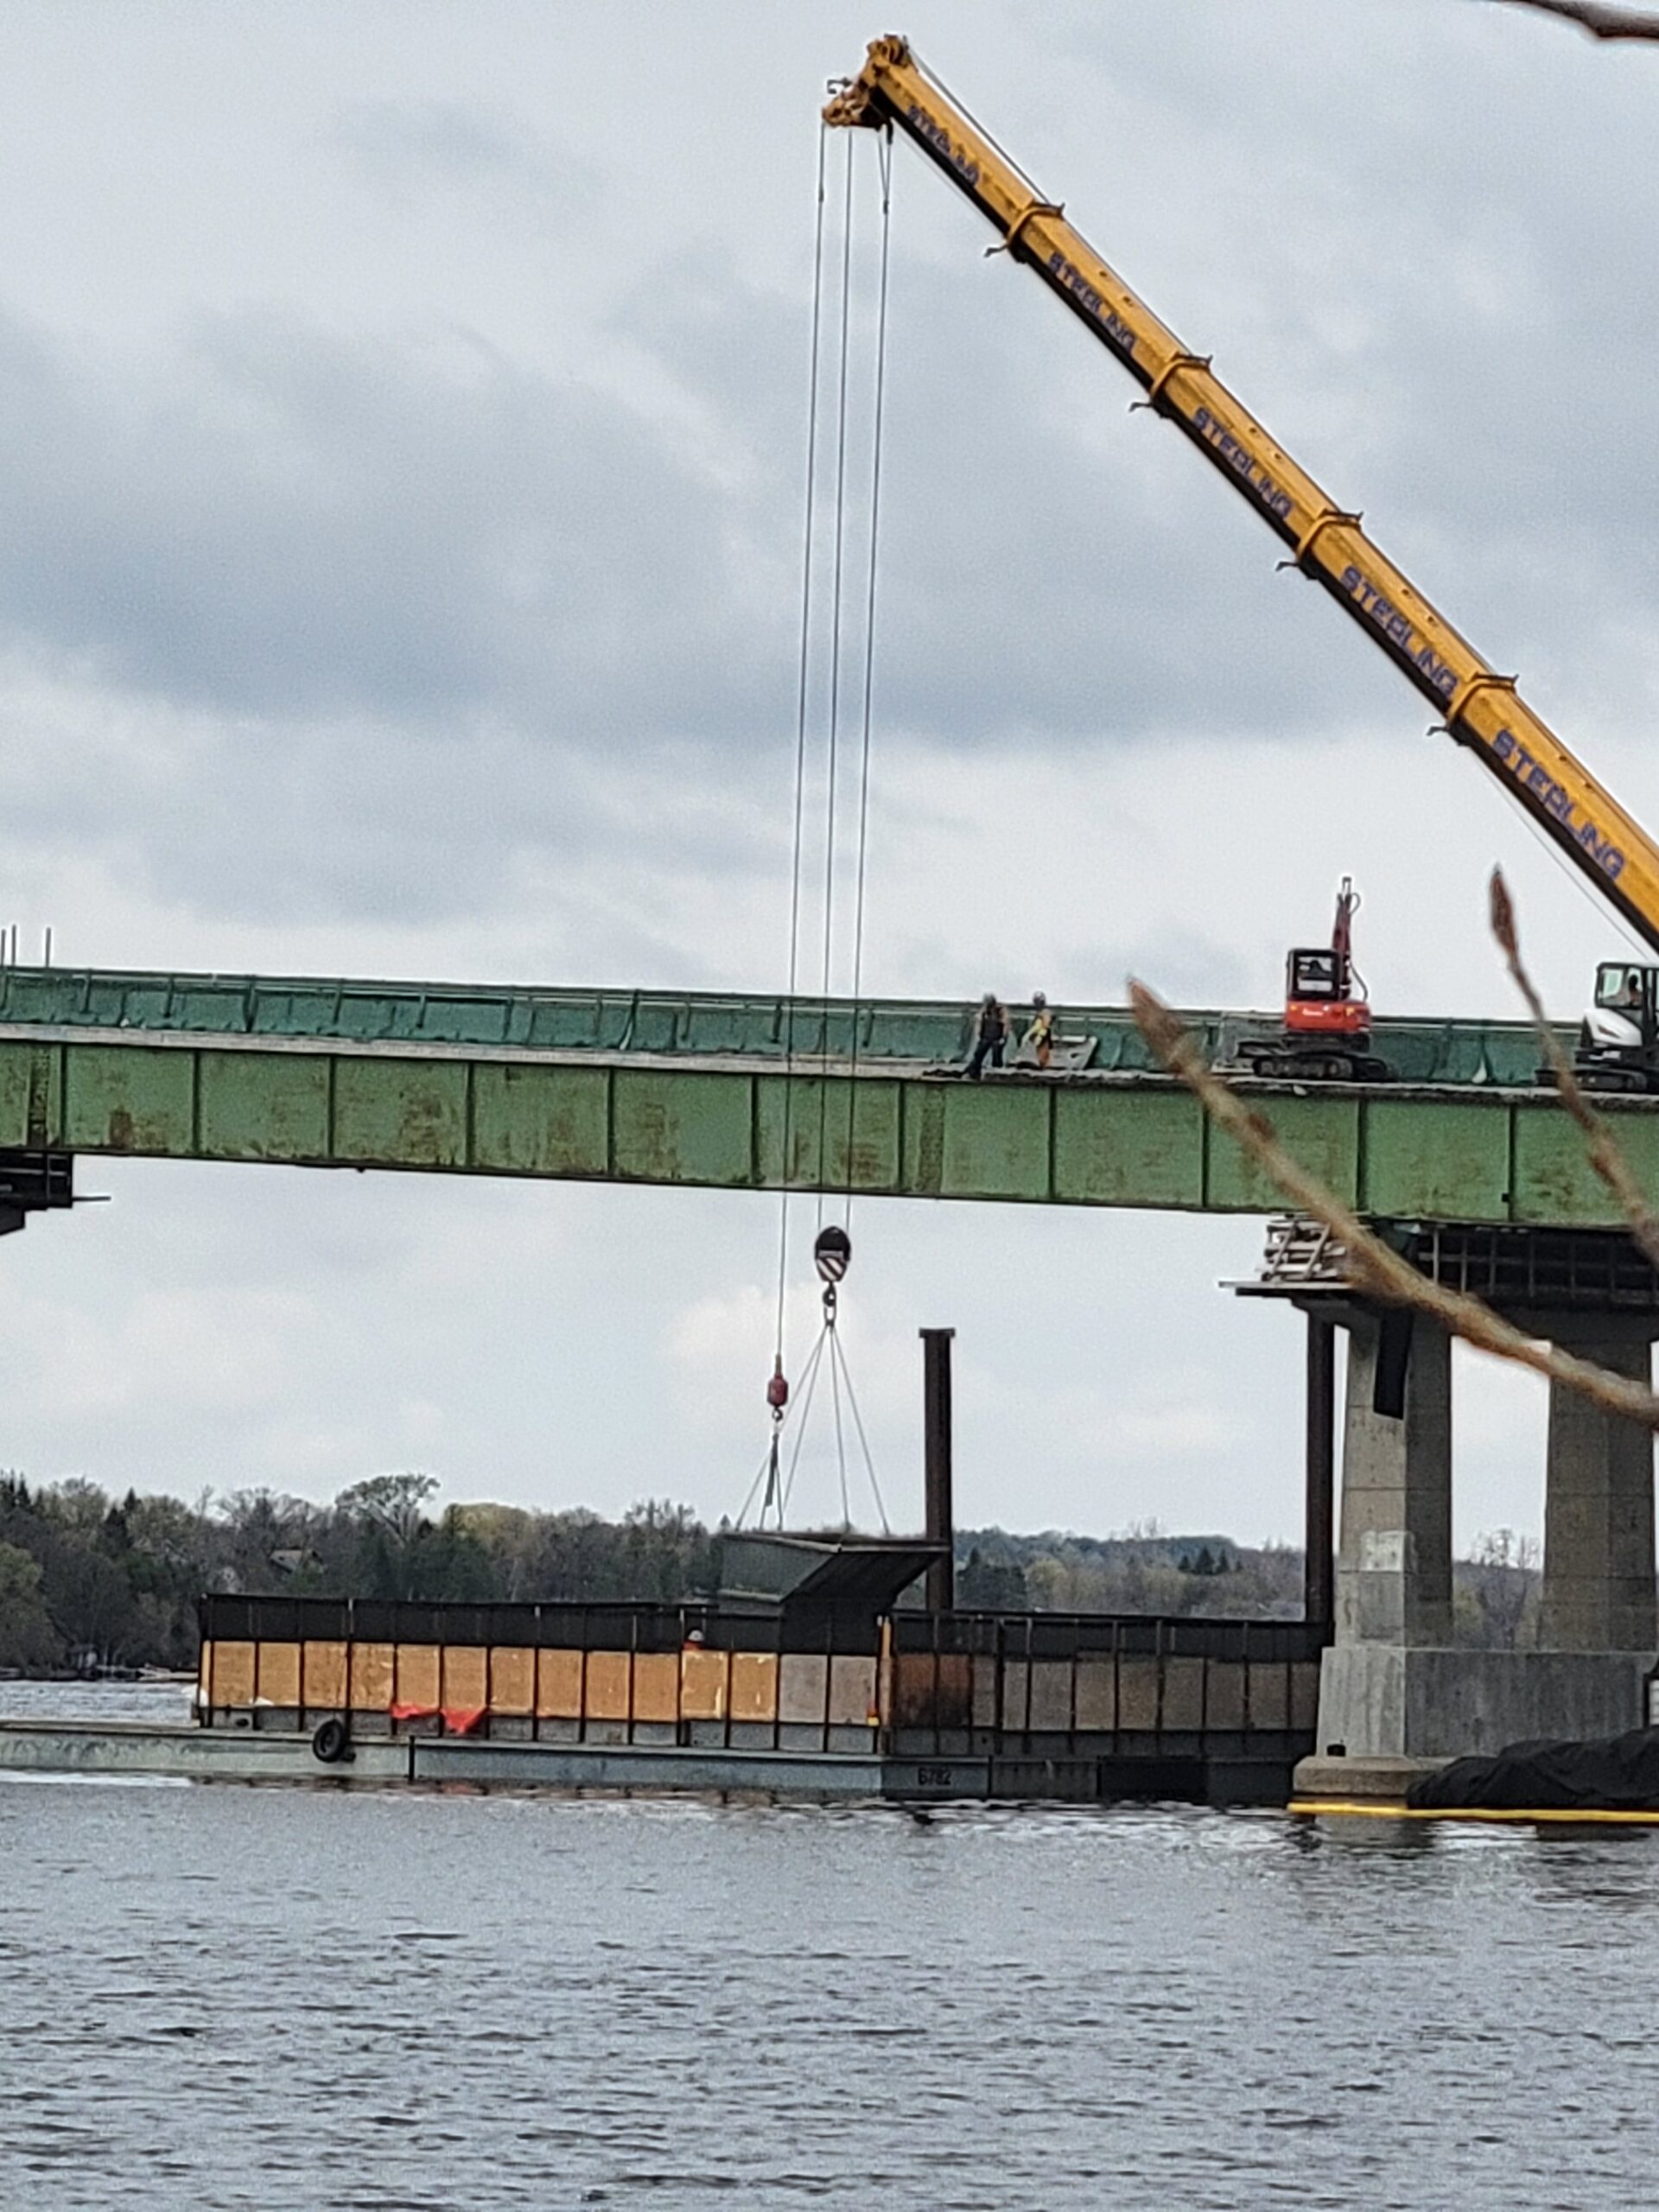 360-ton crane lifting the containment bin from the barge